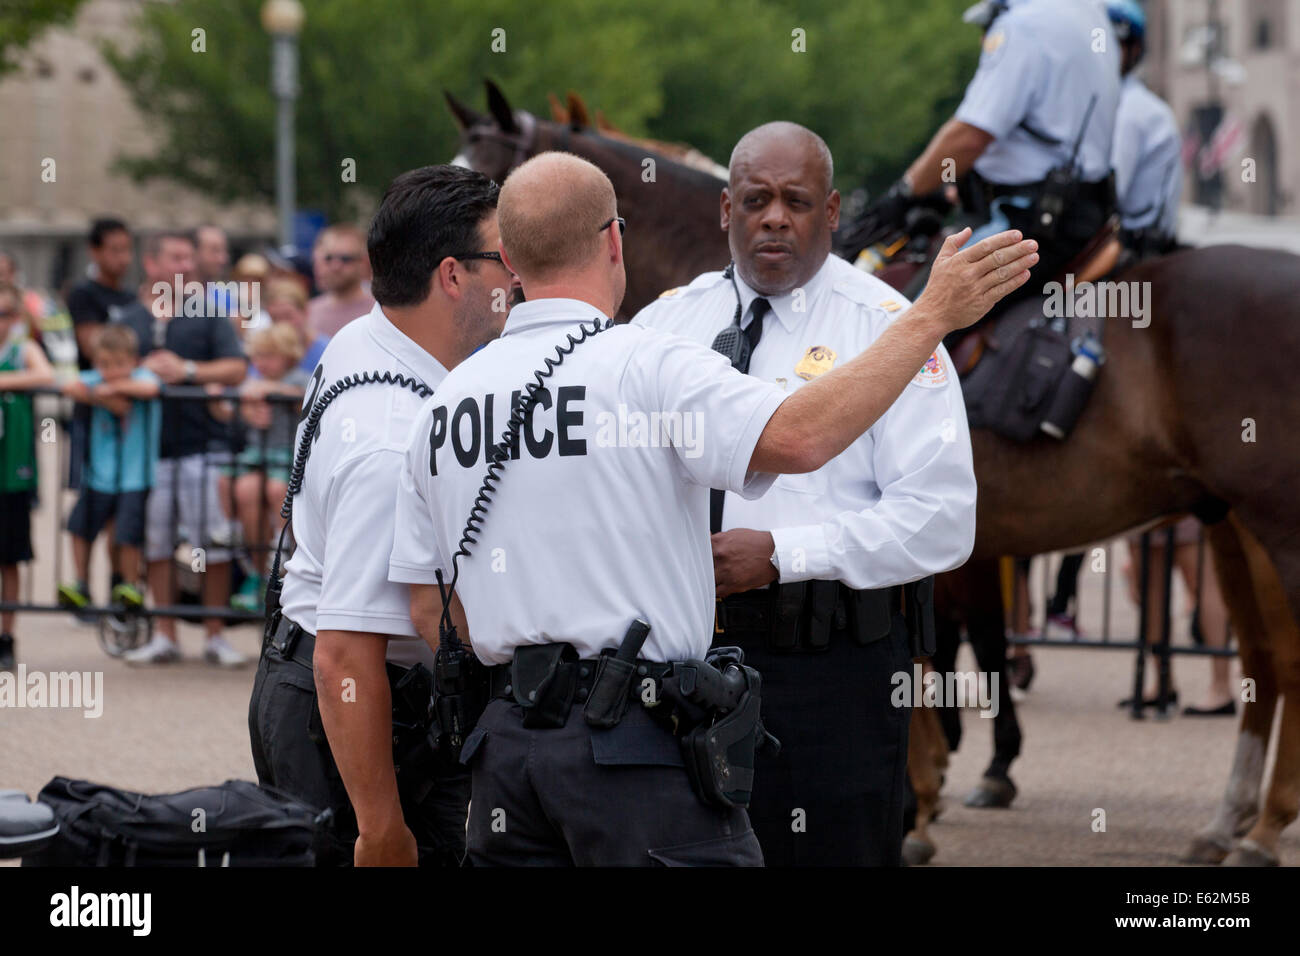 US Secret Service Uniformed Police at a protest in front of the White House - Washington, DC USA Stock Photo